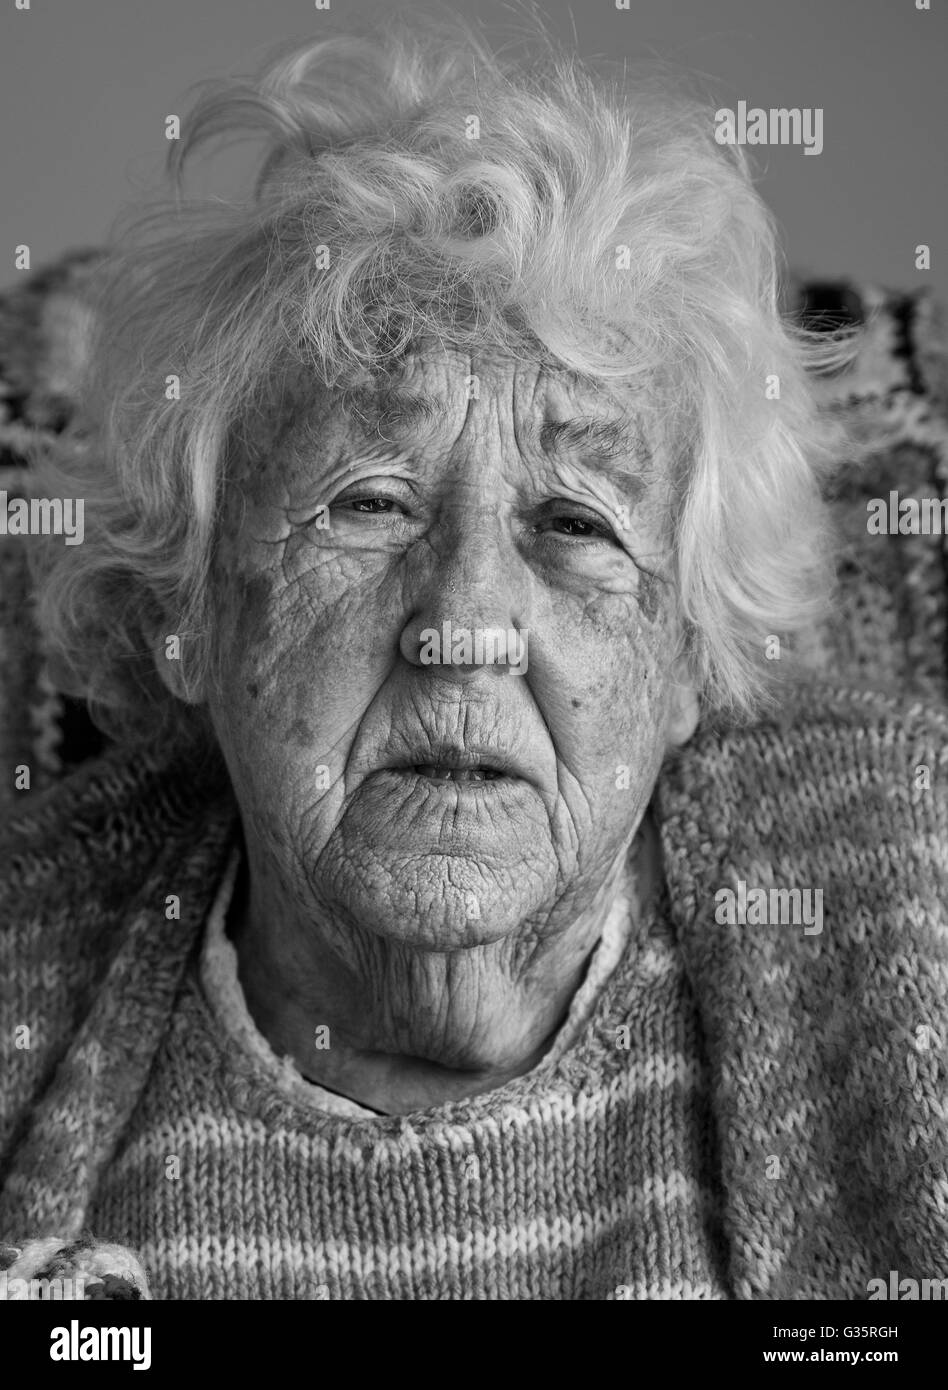 An old lady looking sad Stock Photo